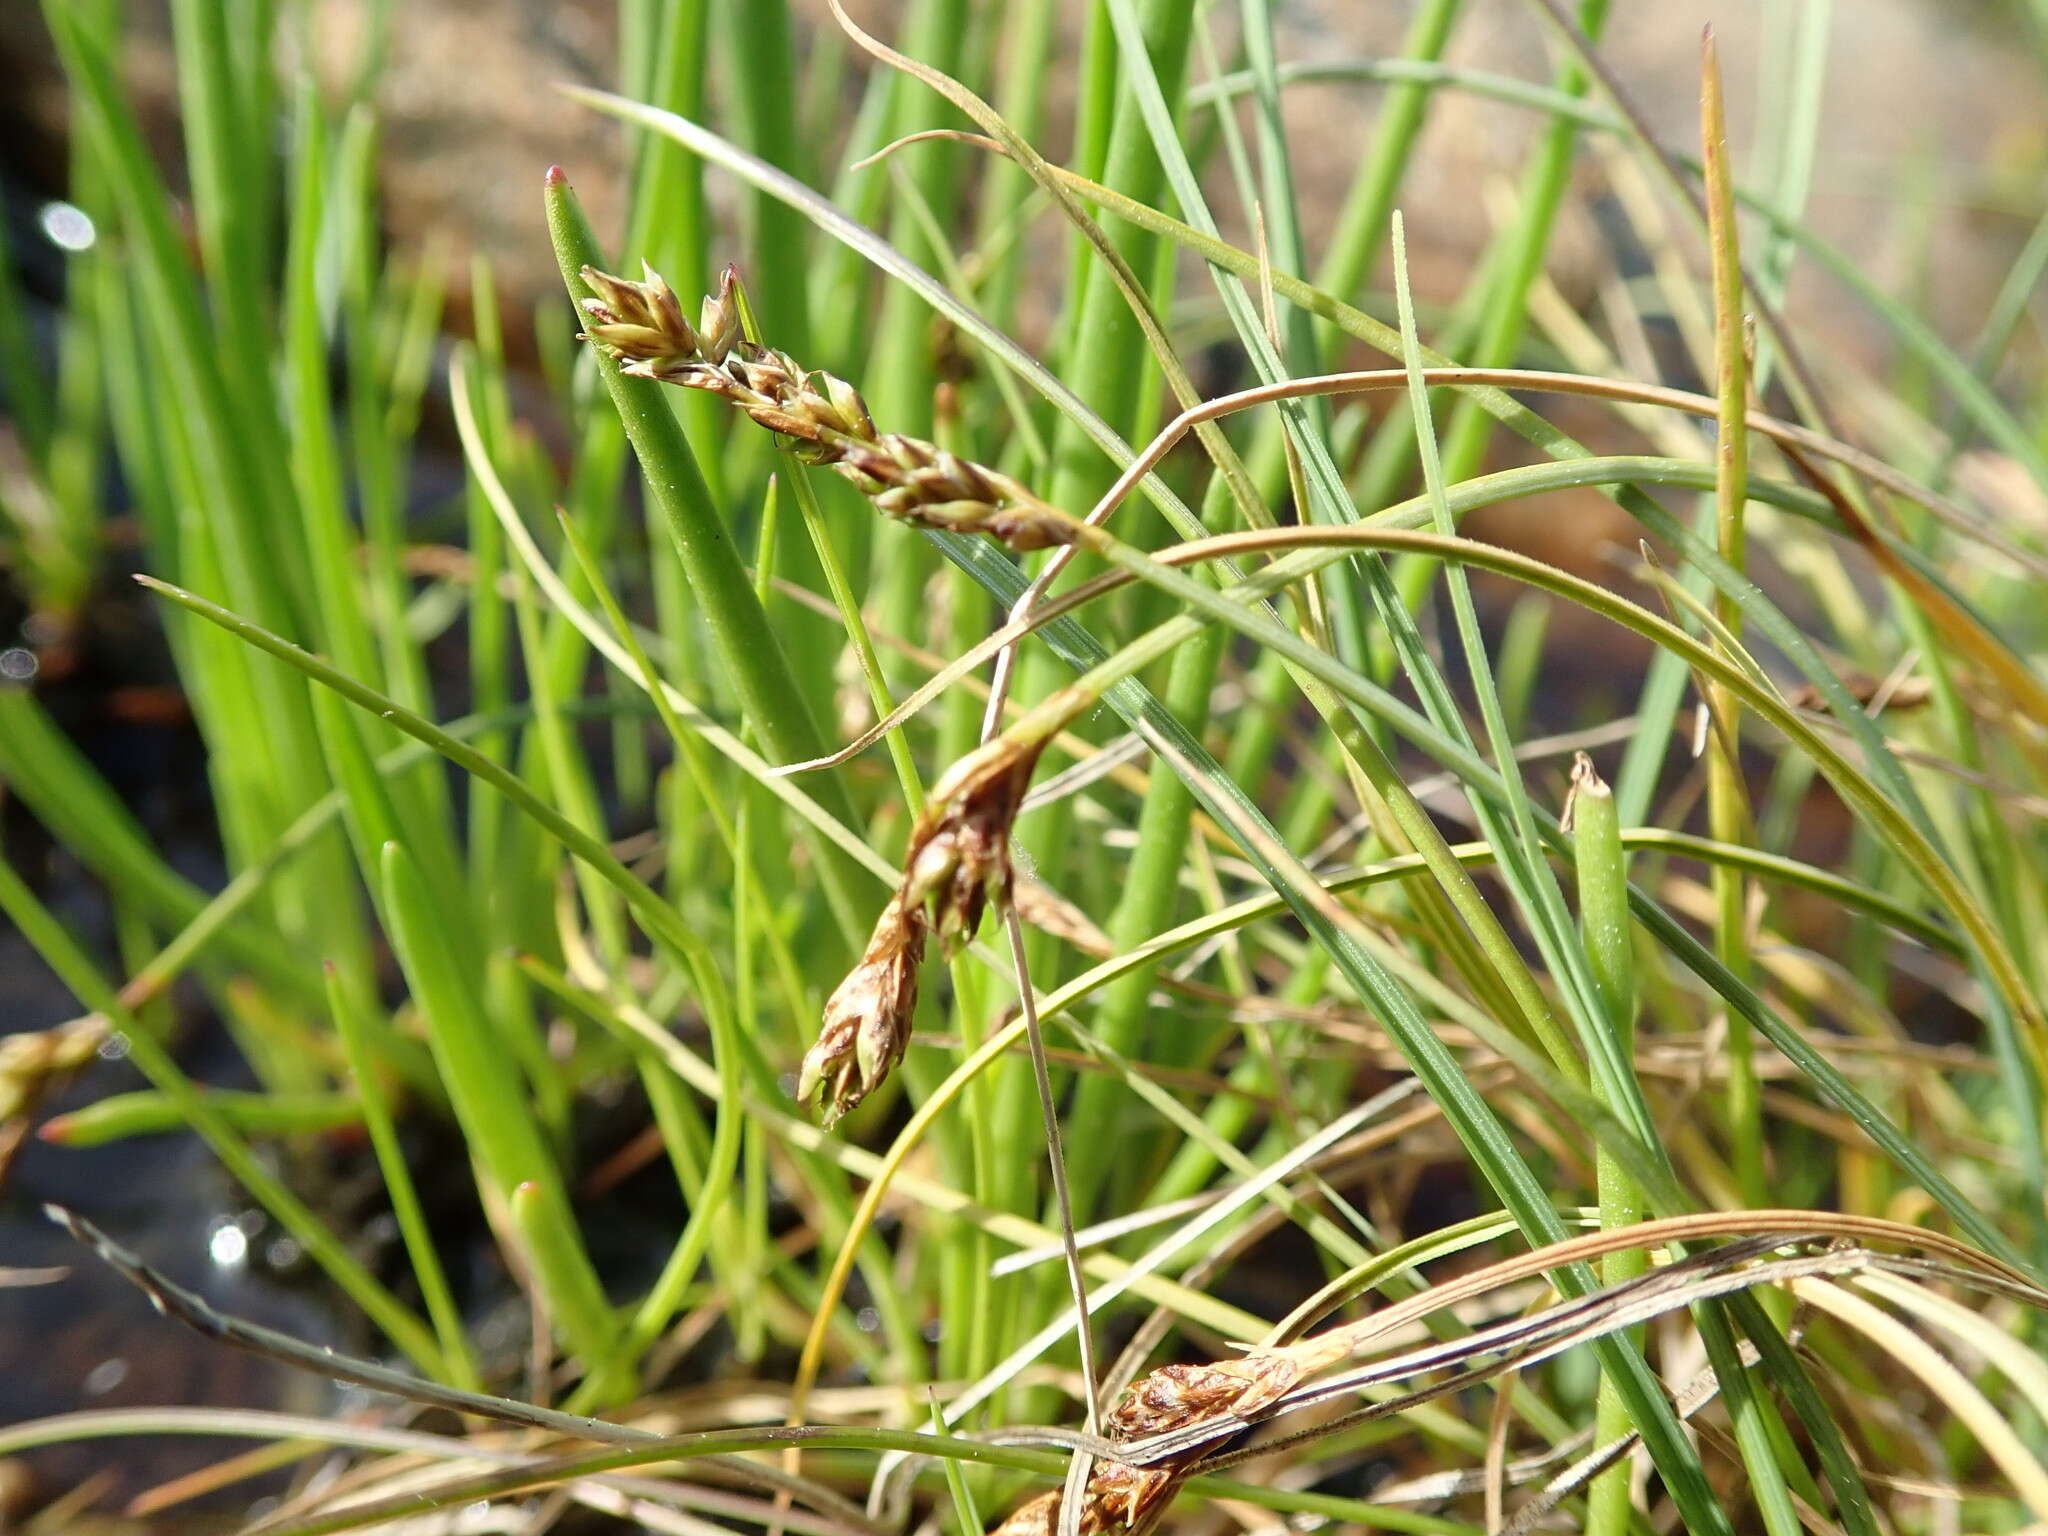 Image of Clustered sedge